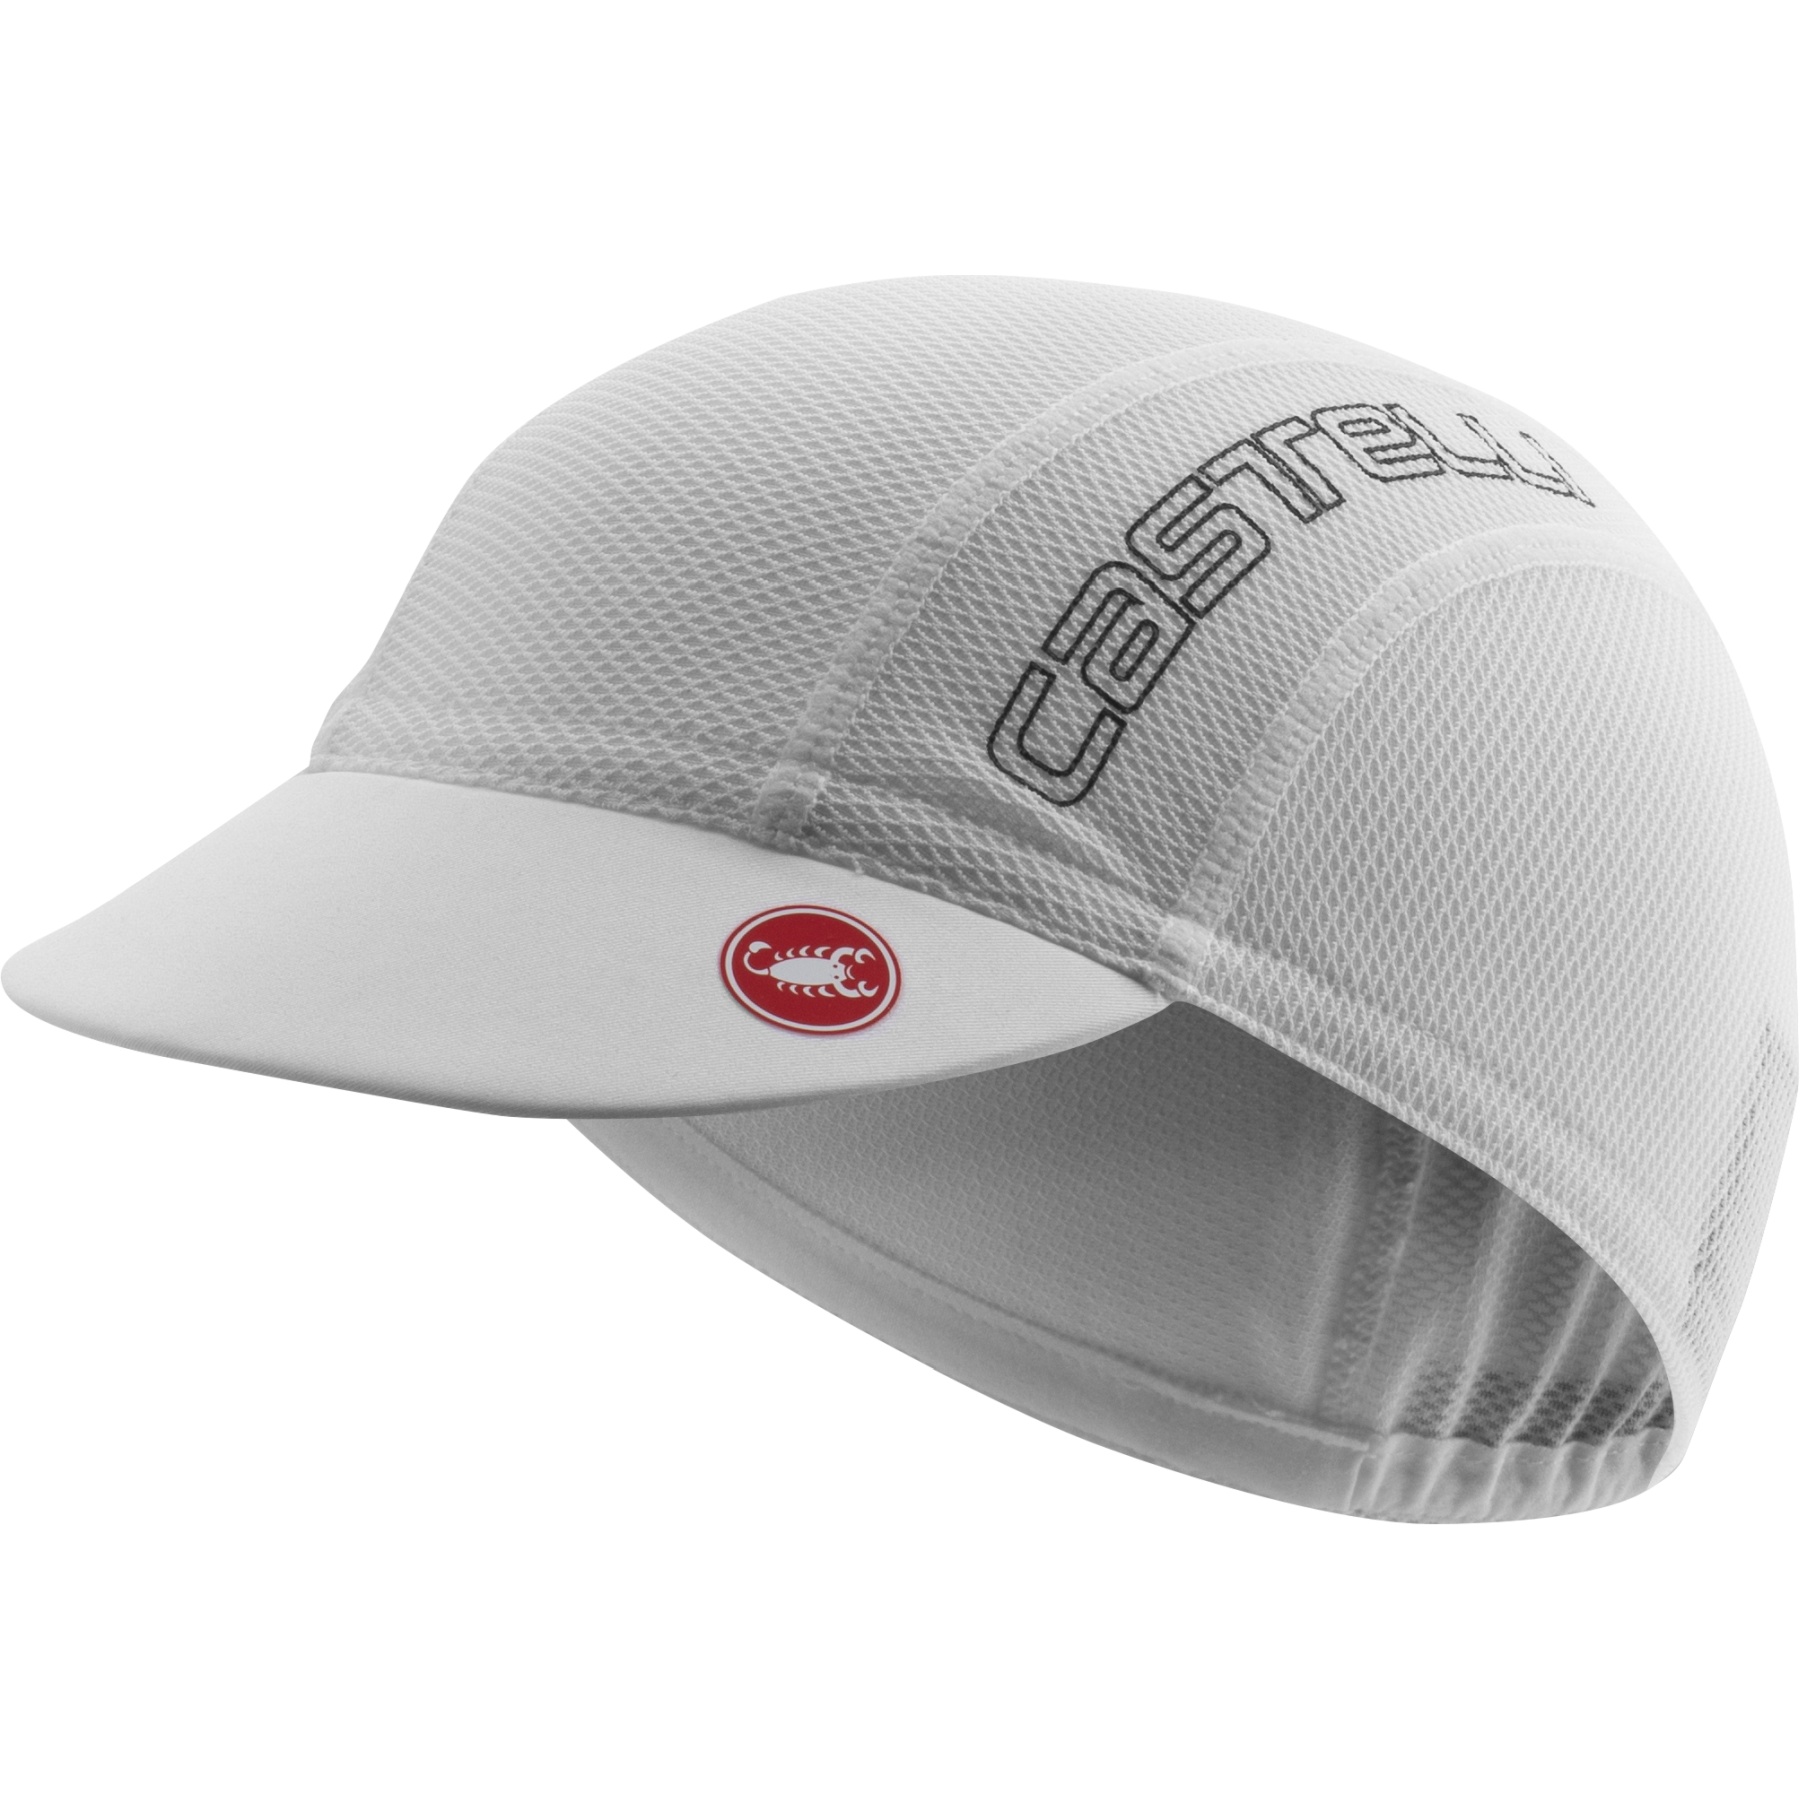 Image of Castelli A/C 2 Cycling Cap - white/cool grey 008